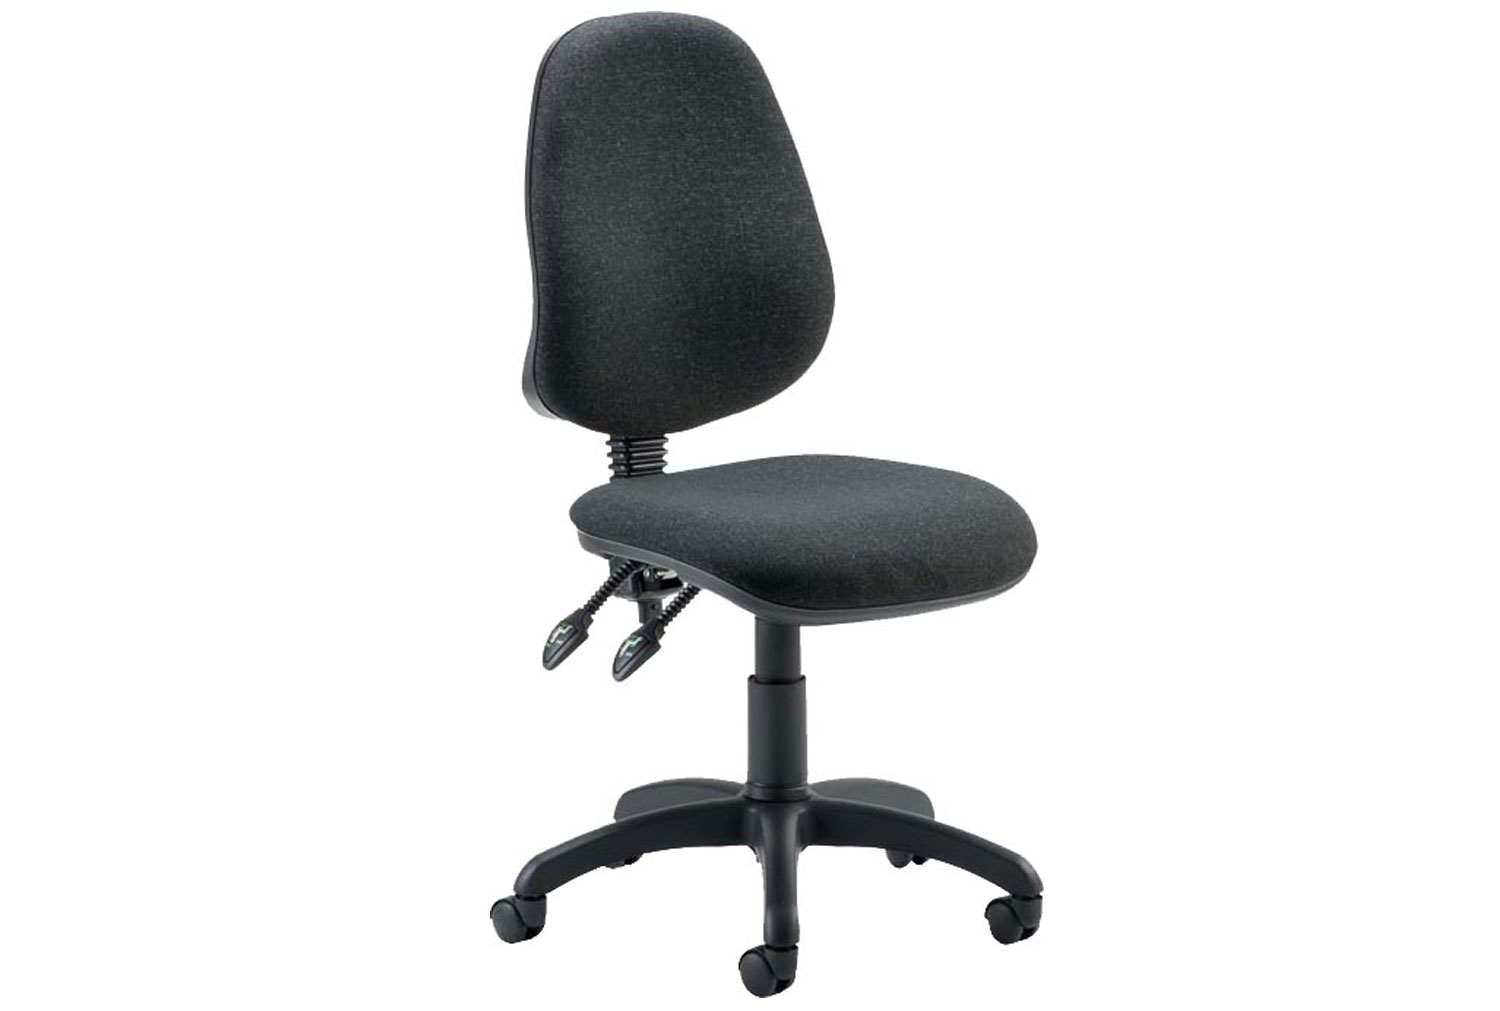 Lunar 2 Lever Operator Office Chair With No Arms, Charcoal, Fully Installed